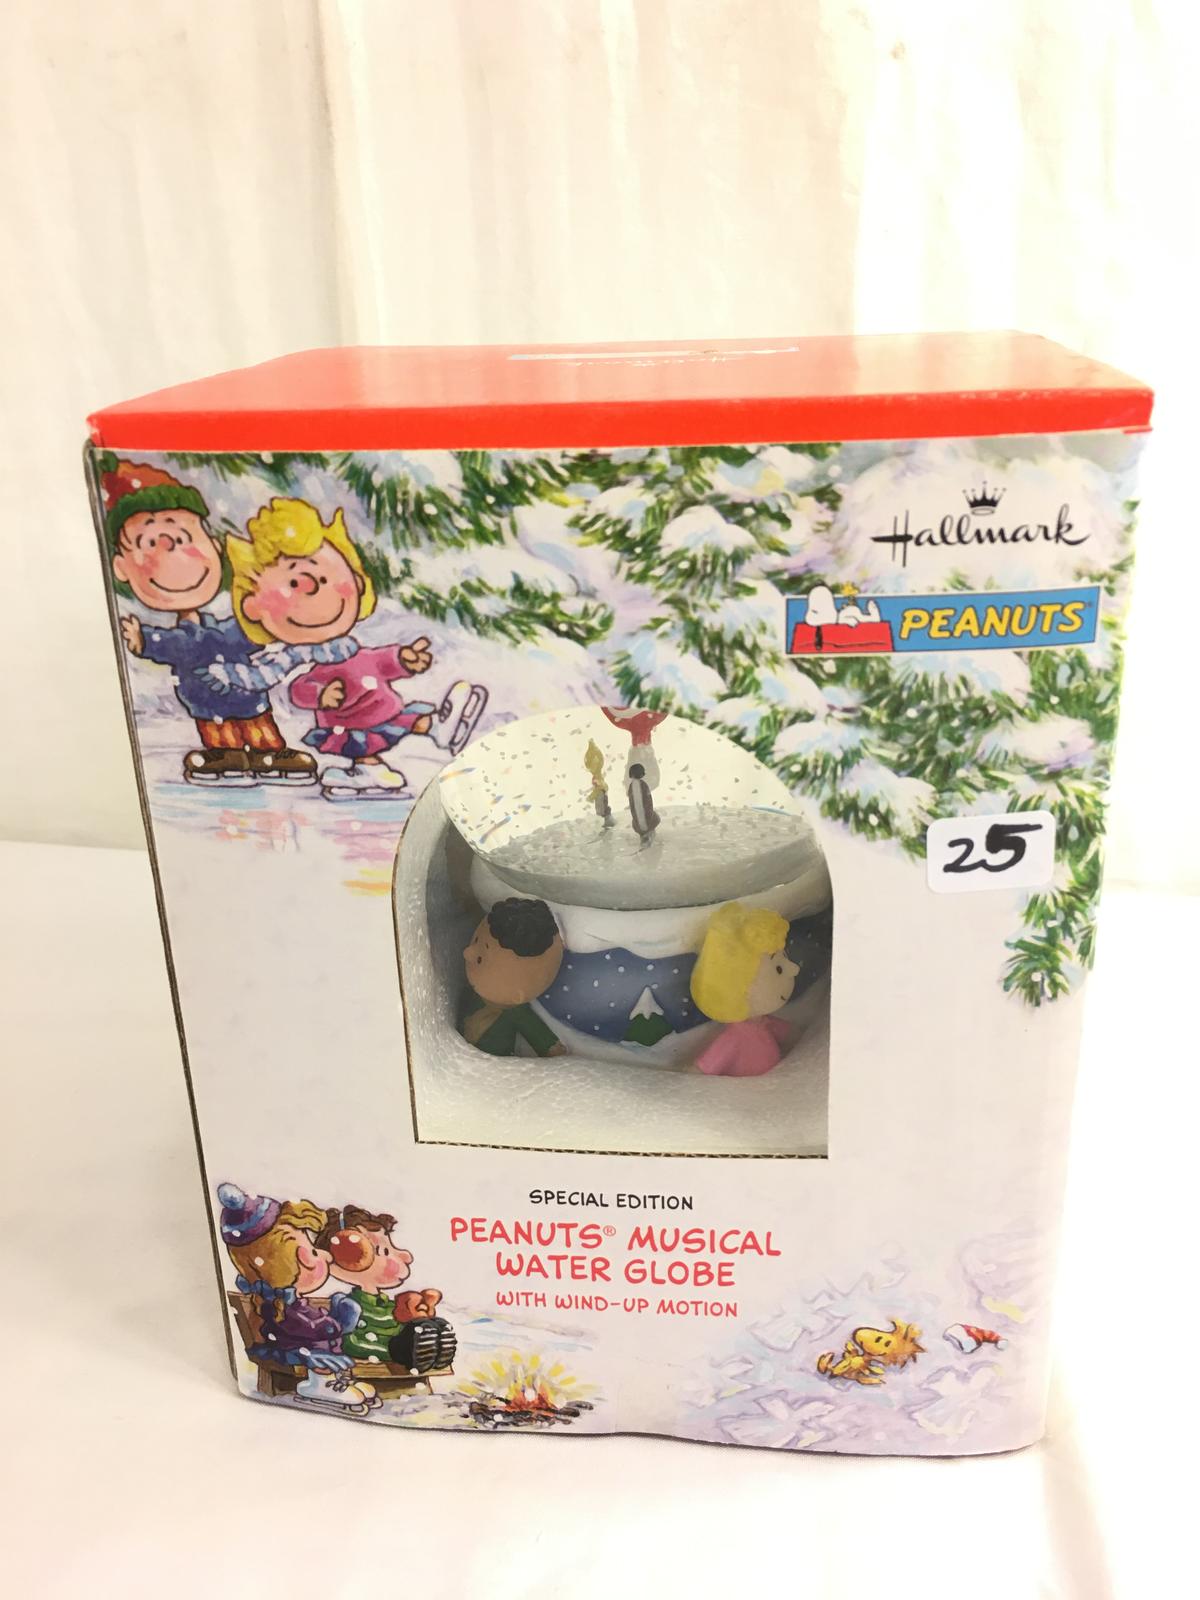 Collector Hallmark Peanuts Musical water Globe with Wind-Ip Motion Box Size: 7.5"Tall Box